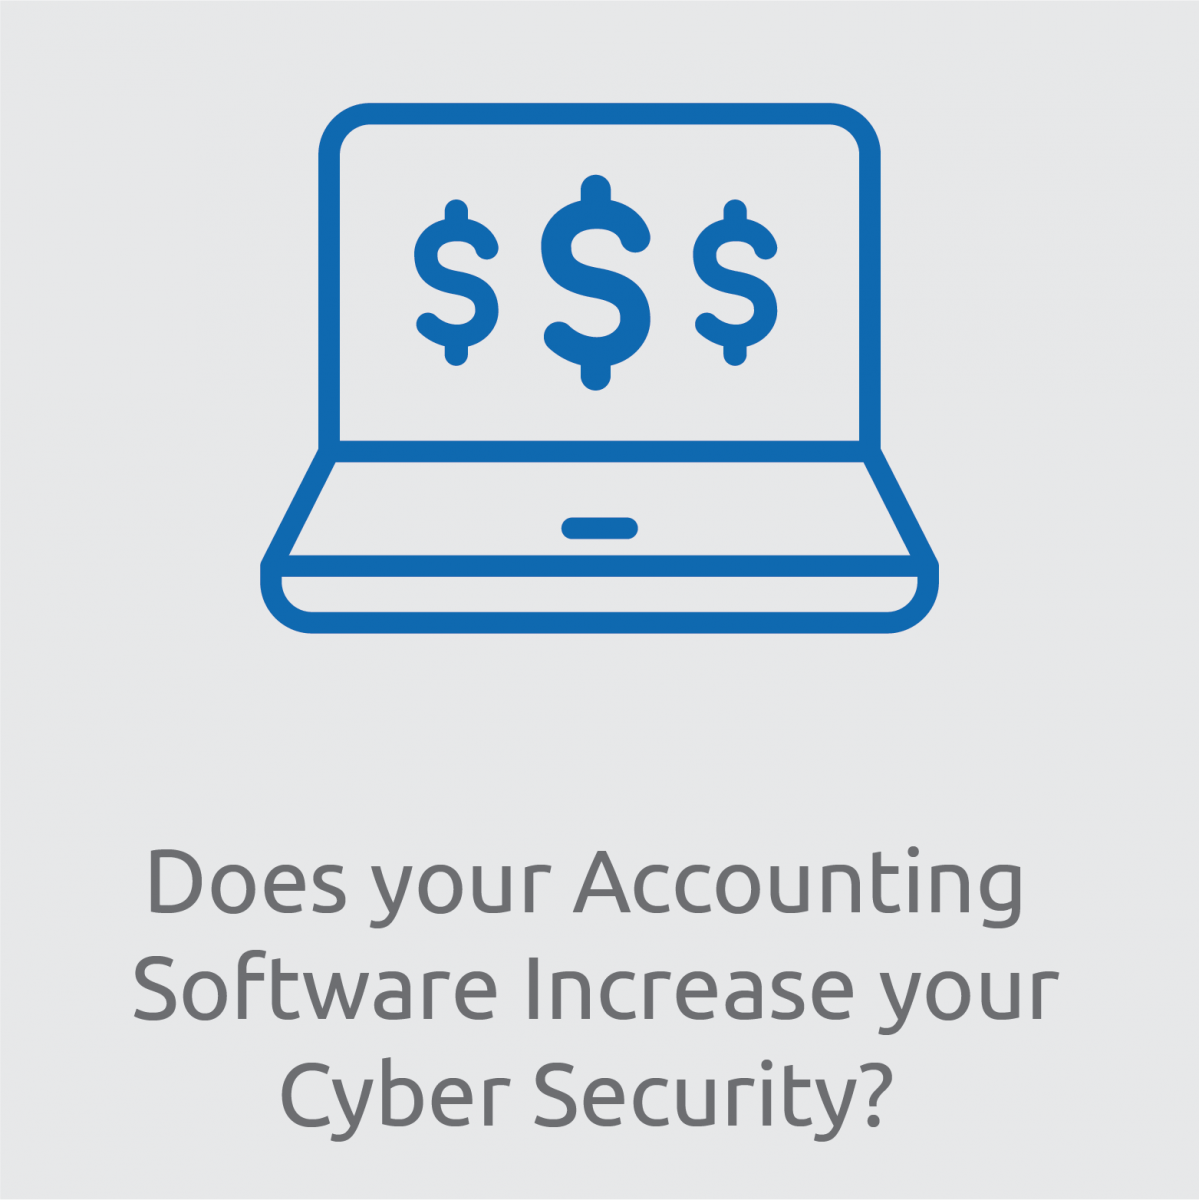 Does Your Accounting Software Increase Your Cyber Security